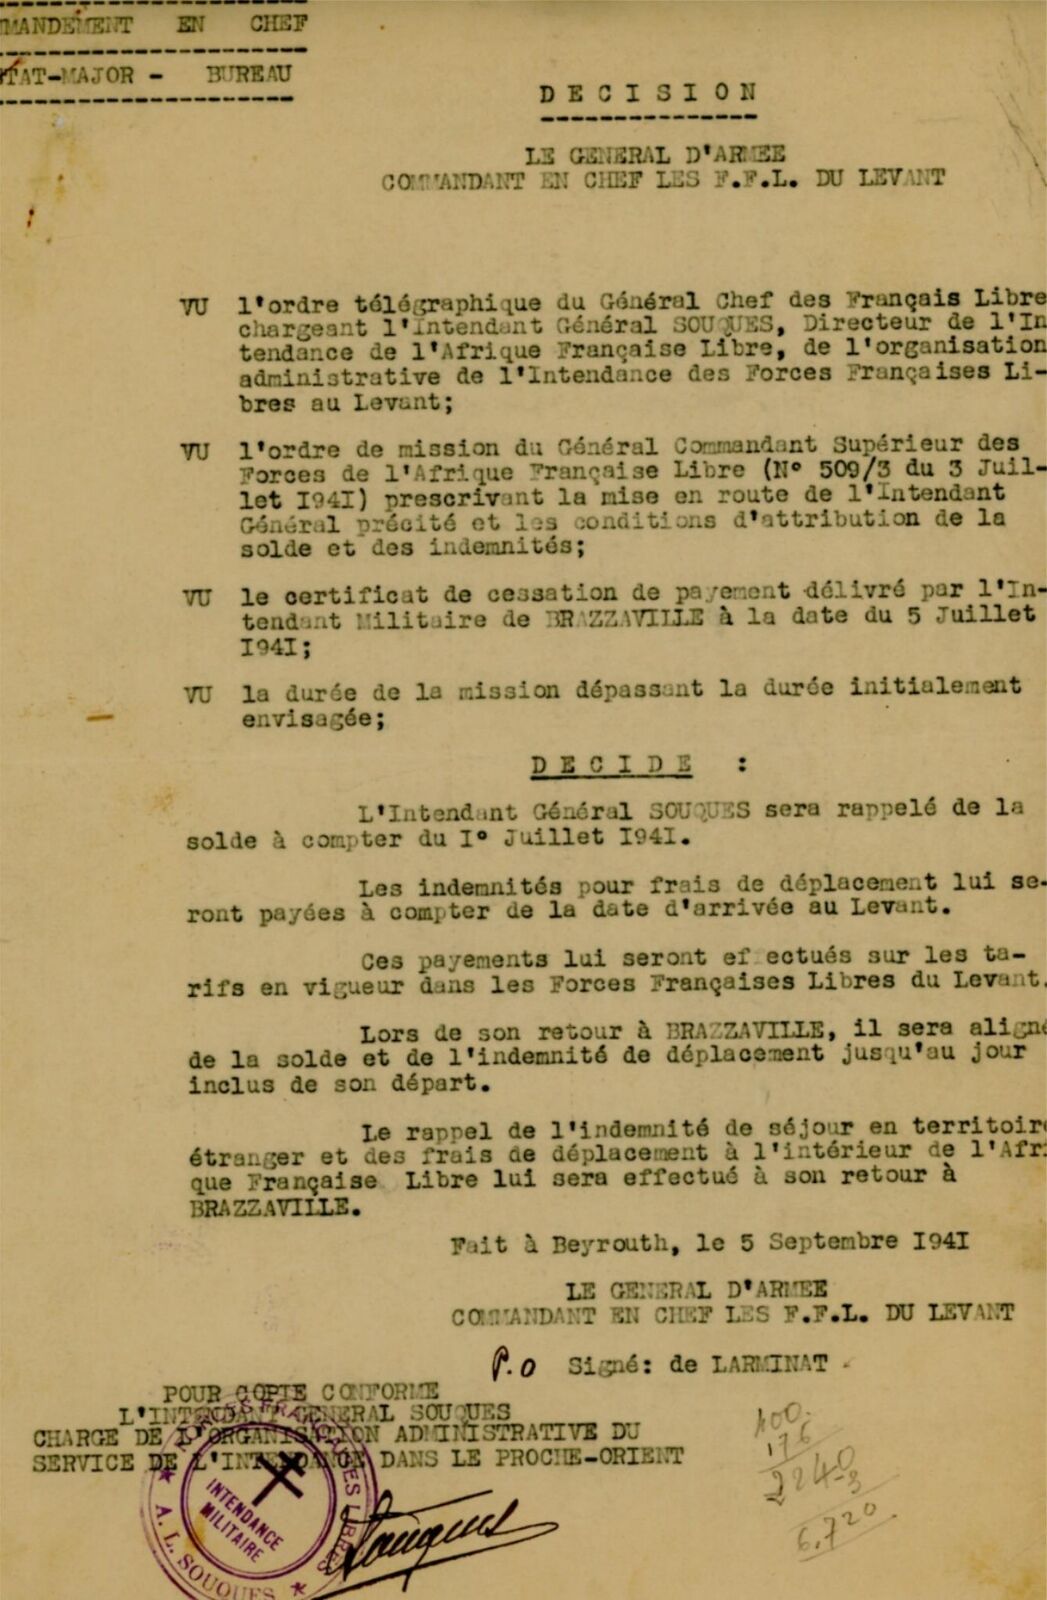 1941 FREE FRENCH in LEBANON, RARE military DOCUMENT SIGNED